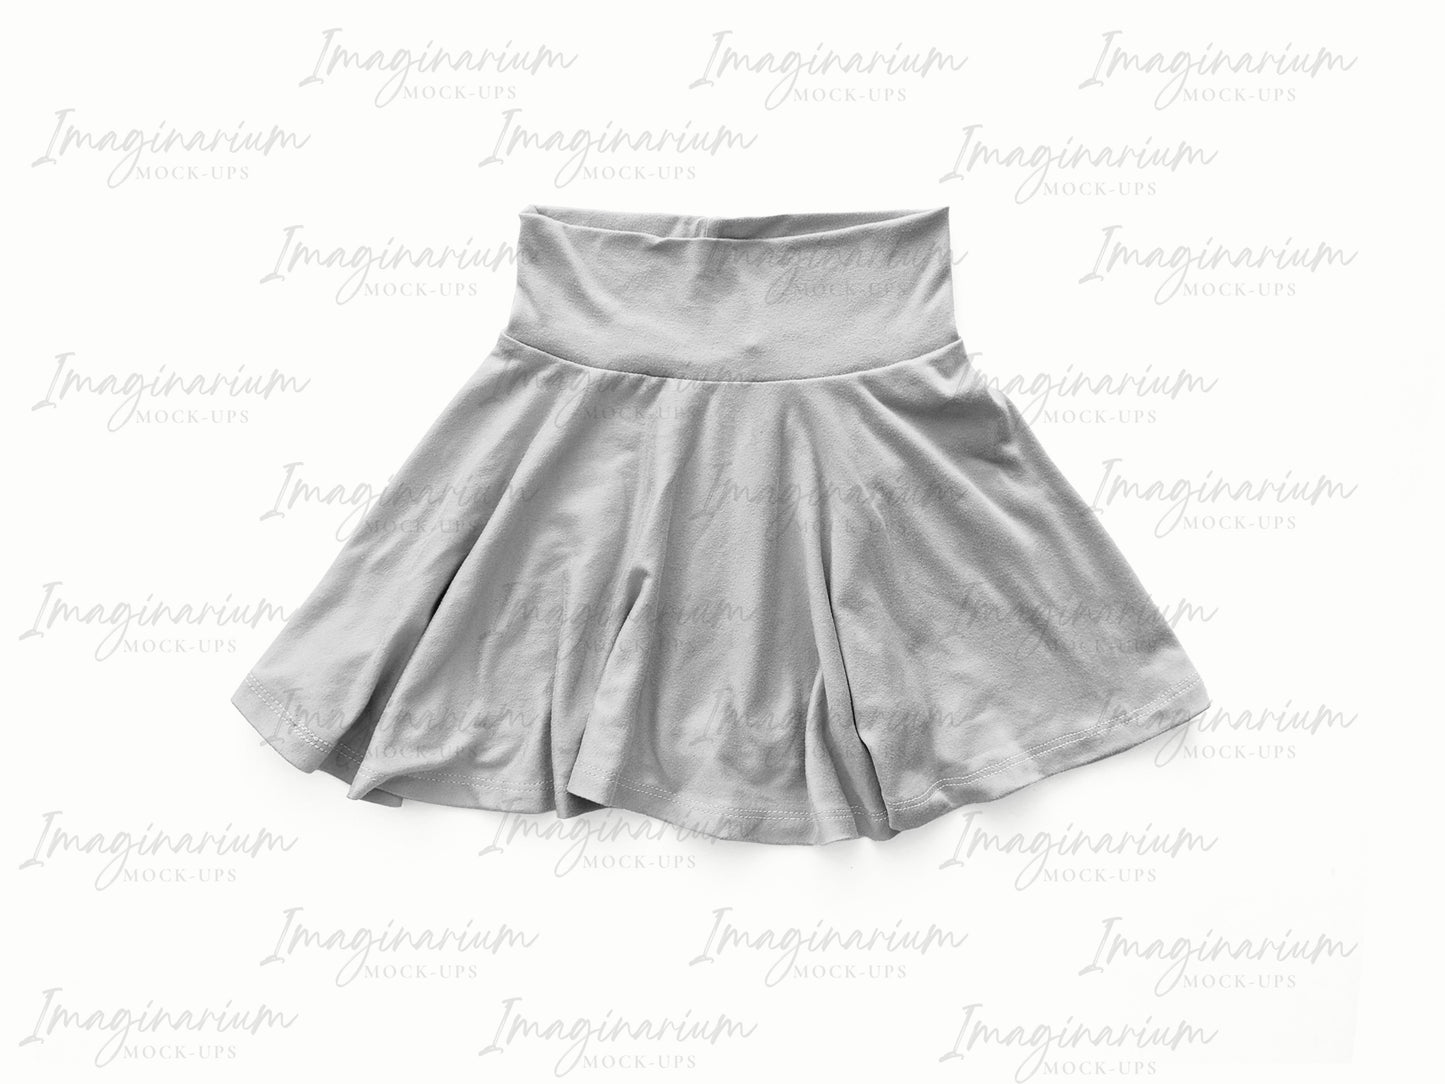 Brielle Skirt Mock Up, Realistic Clothing Mockup for Photoshop and Procreate